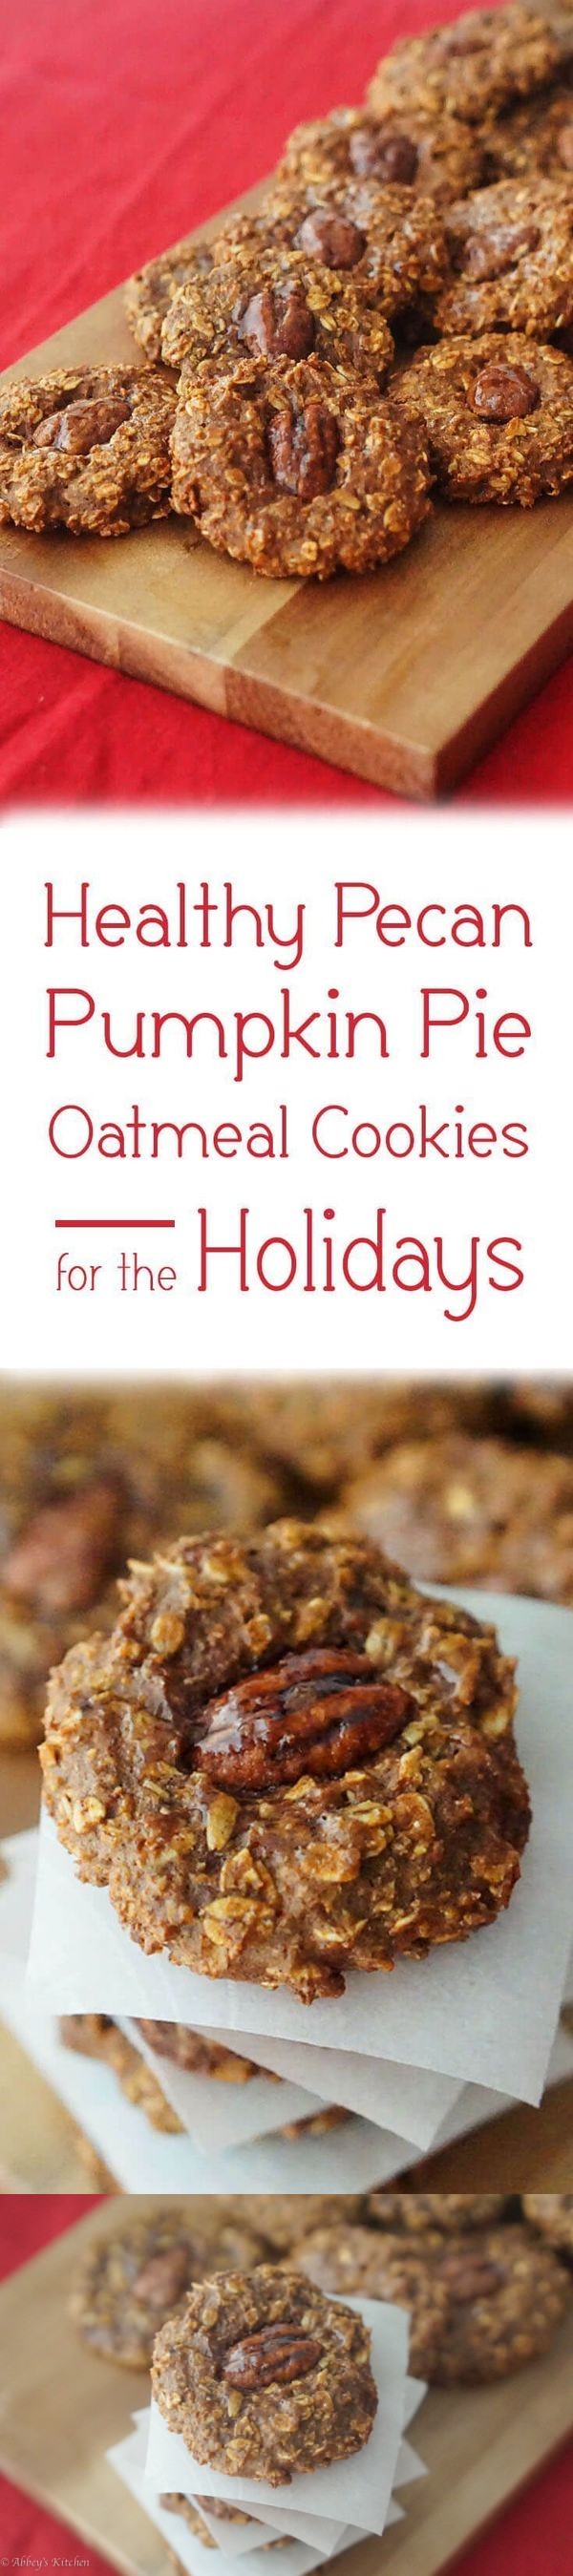 Healthy Pecan Pumpkin Pie Oatmeal Cookies for the Holidays